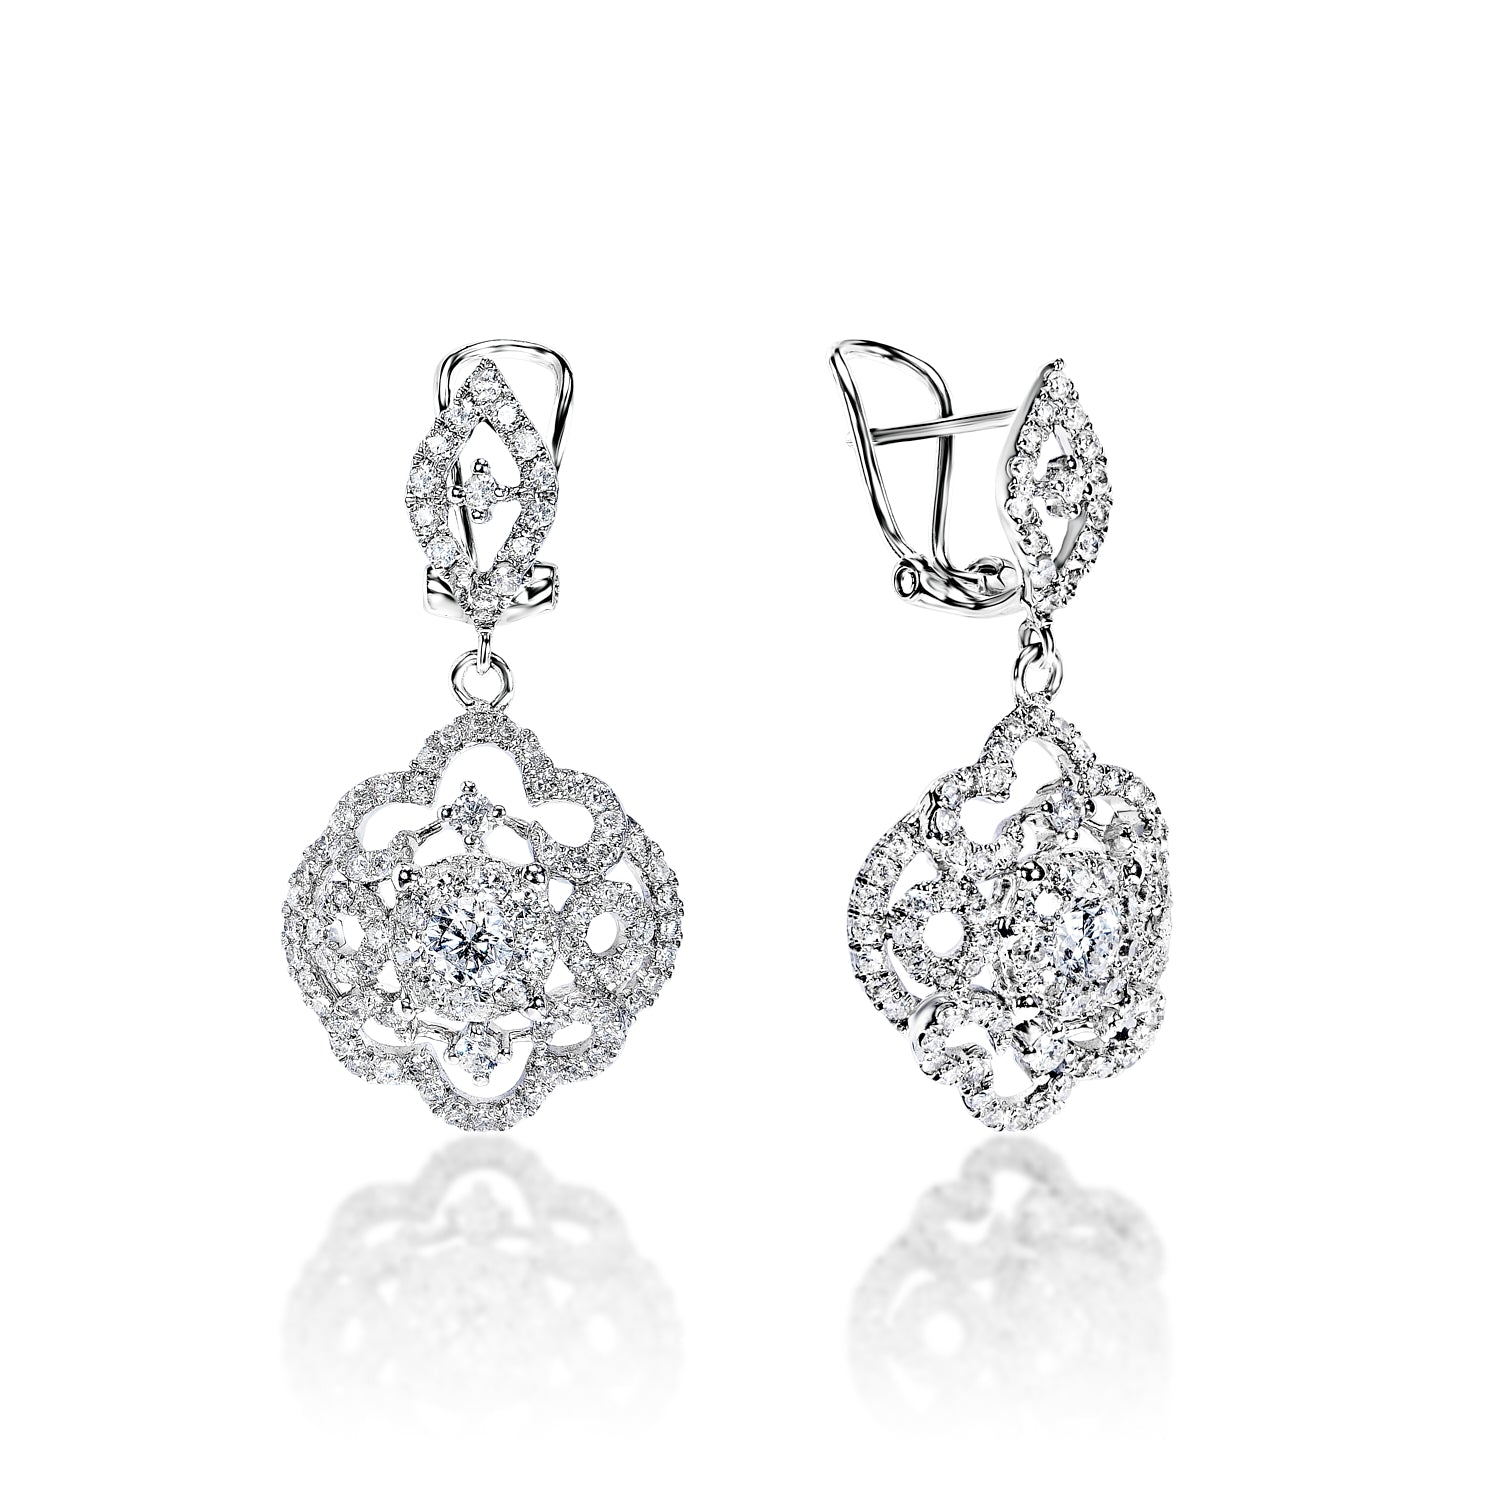 Ailani 2 Carat Round Brilliant Diamond English Lock Earrings in 14k White Gold Front and Side View